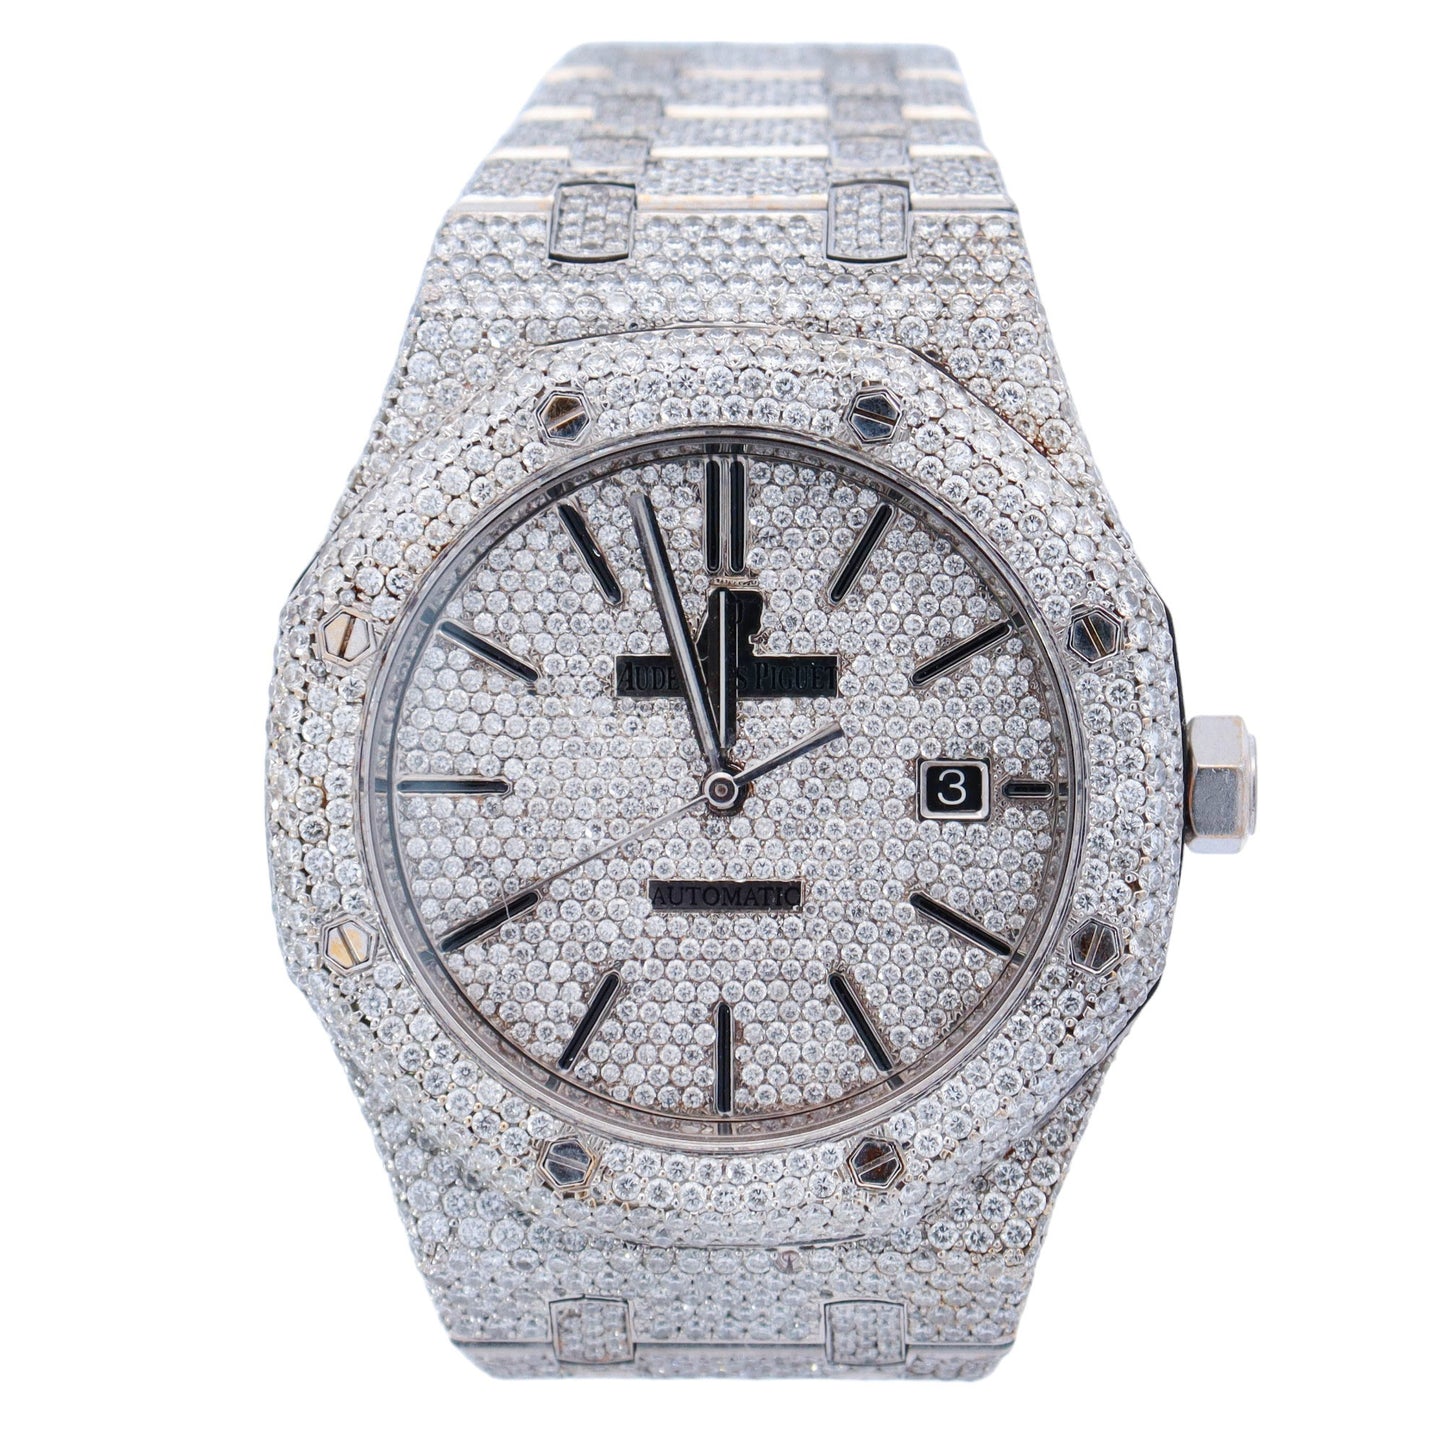 Audemars Piguet Royal Oak Stainless Steel 41mm Custom ICED OUT Pave Dial Watch Reference# 14289 - Happy Jewelers Fine Jewelry Lifetime Warranty